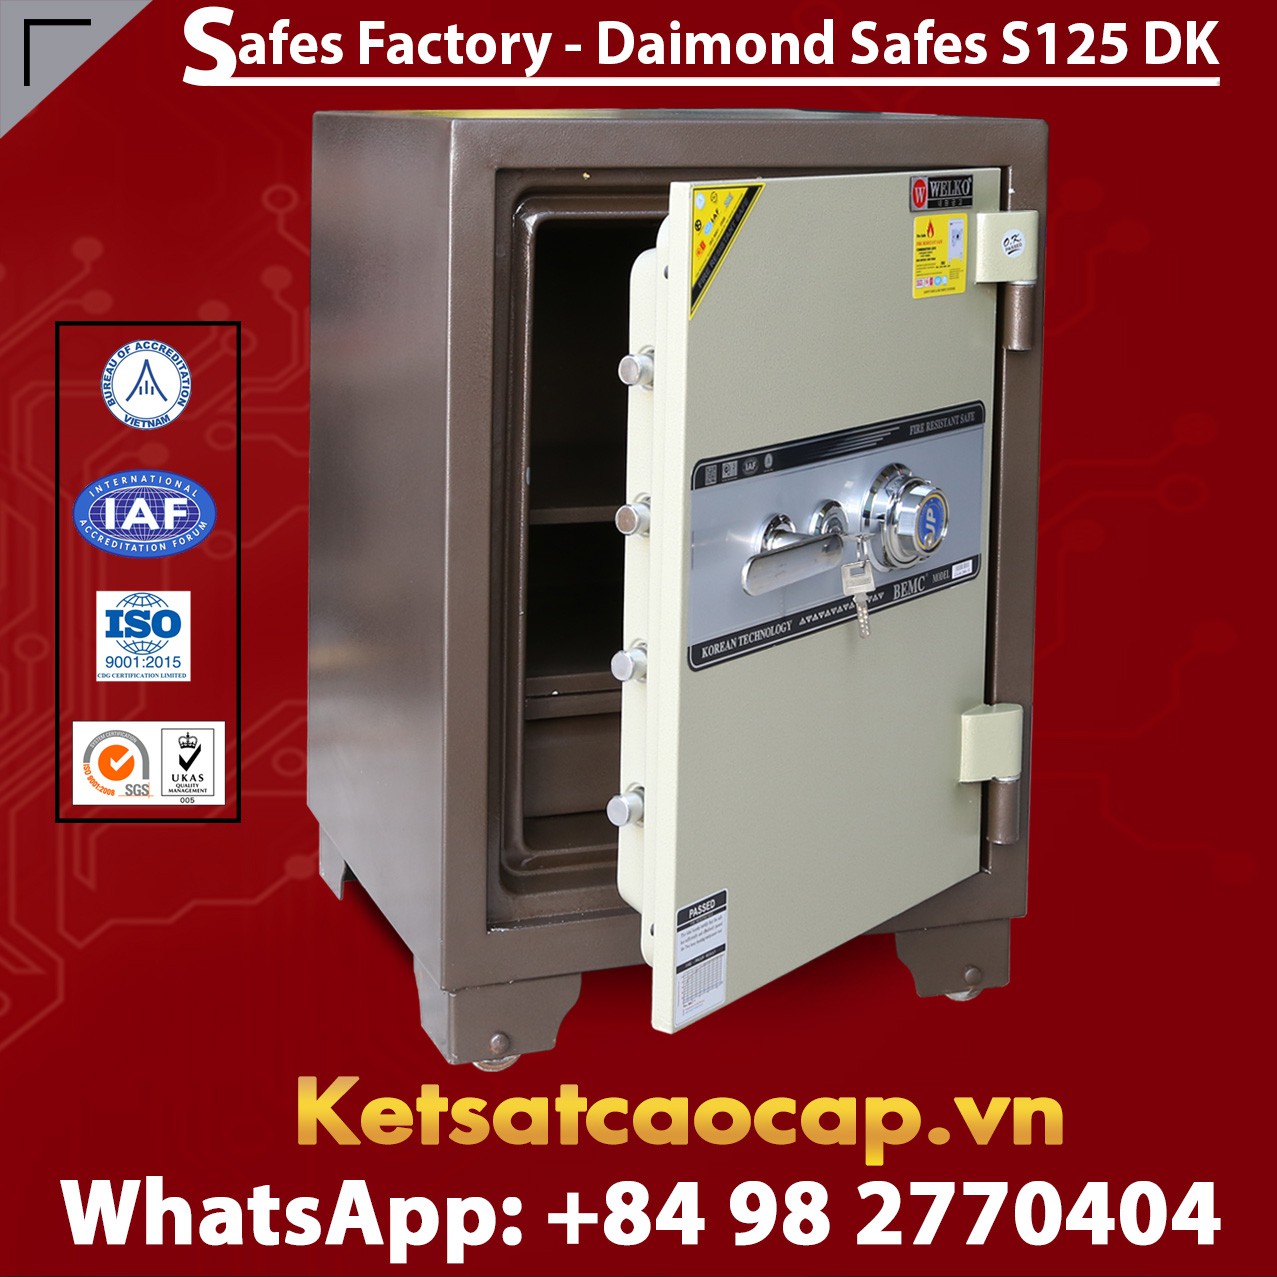 Office Safes High Quality Factory Price cao cấp